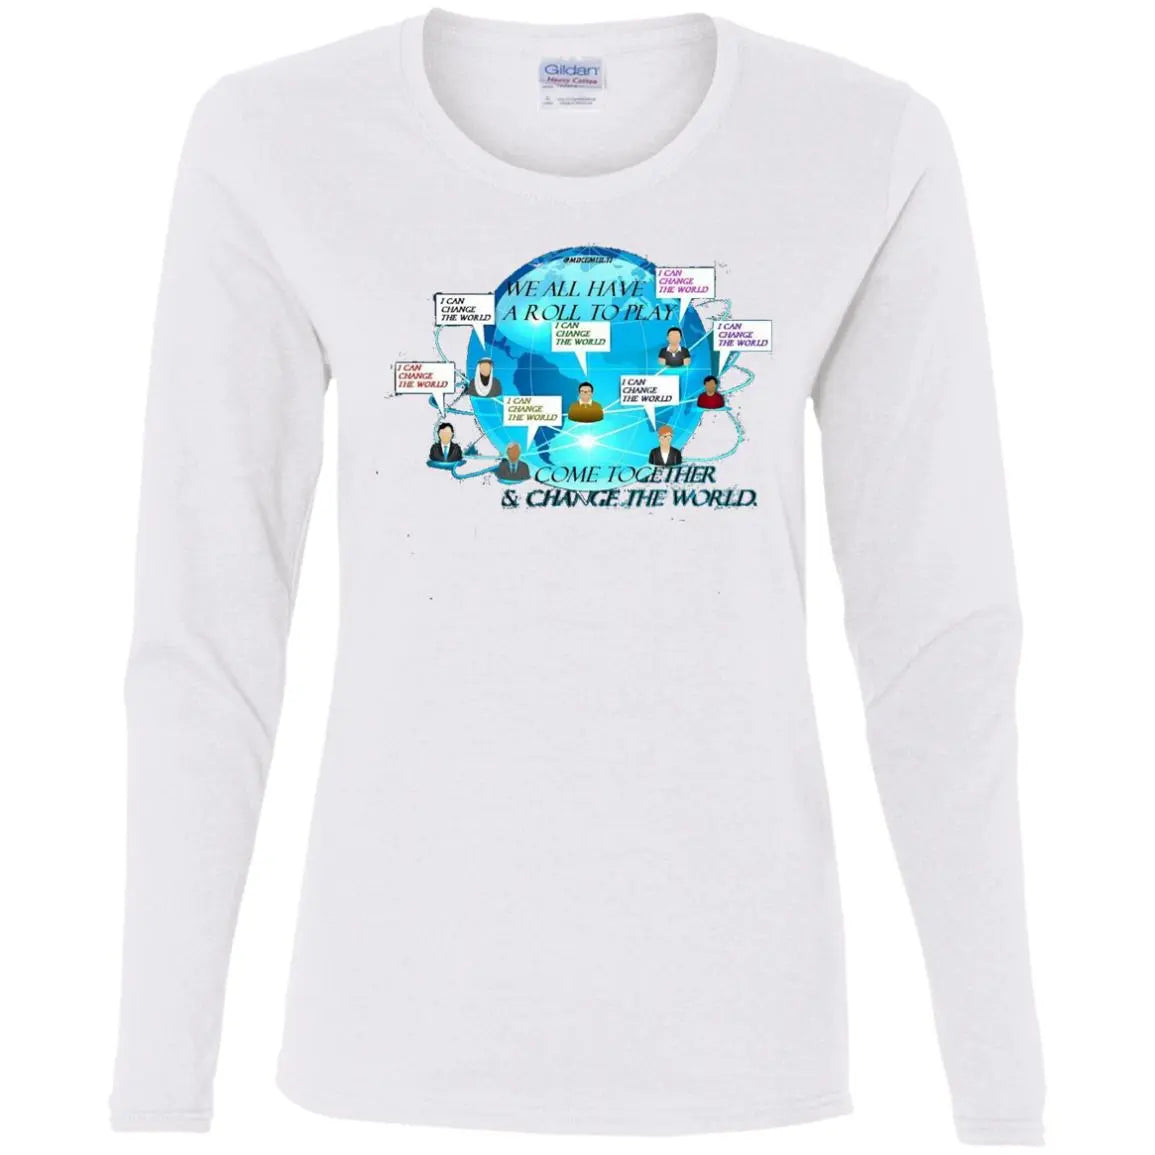 Come Together & Change The World - Ladies' Cotton LS T-Shirt CustomCat